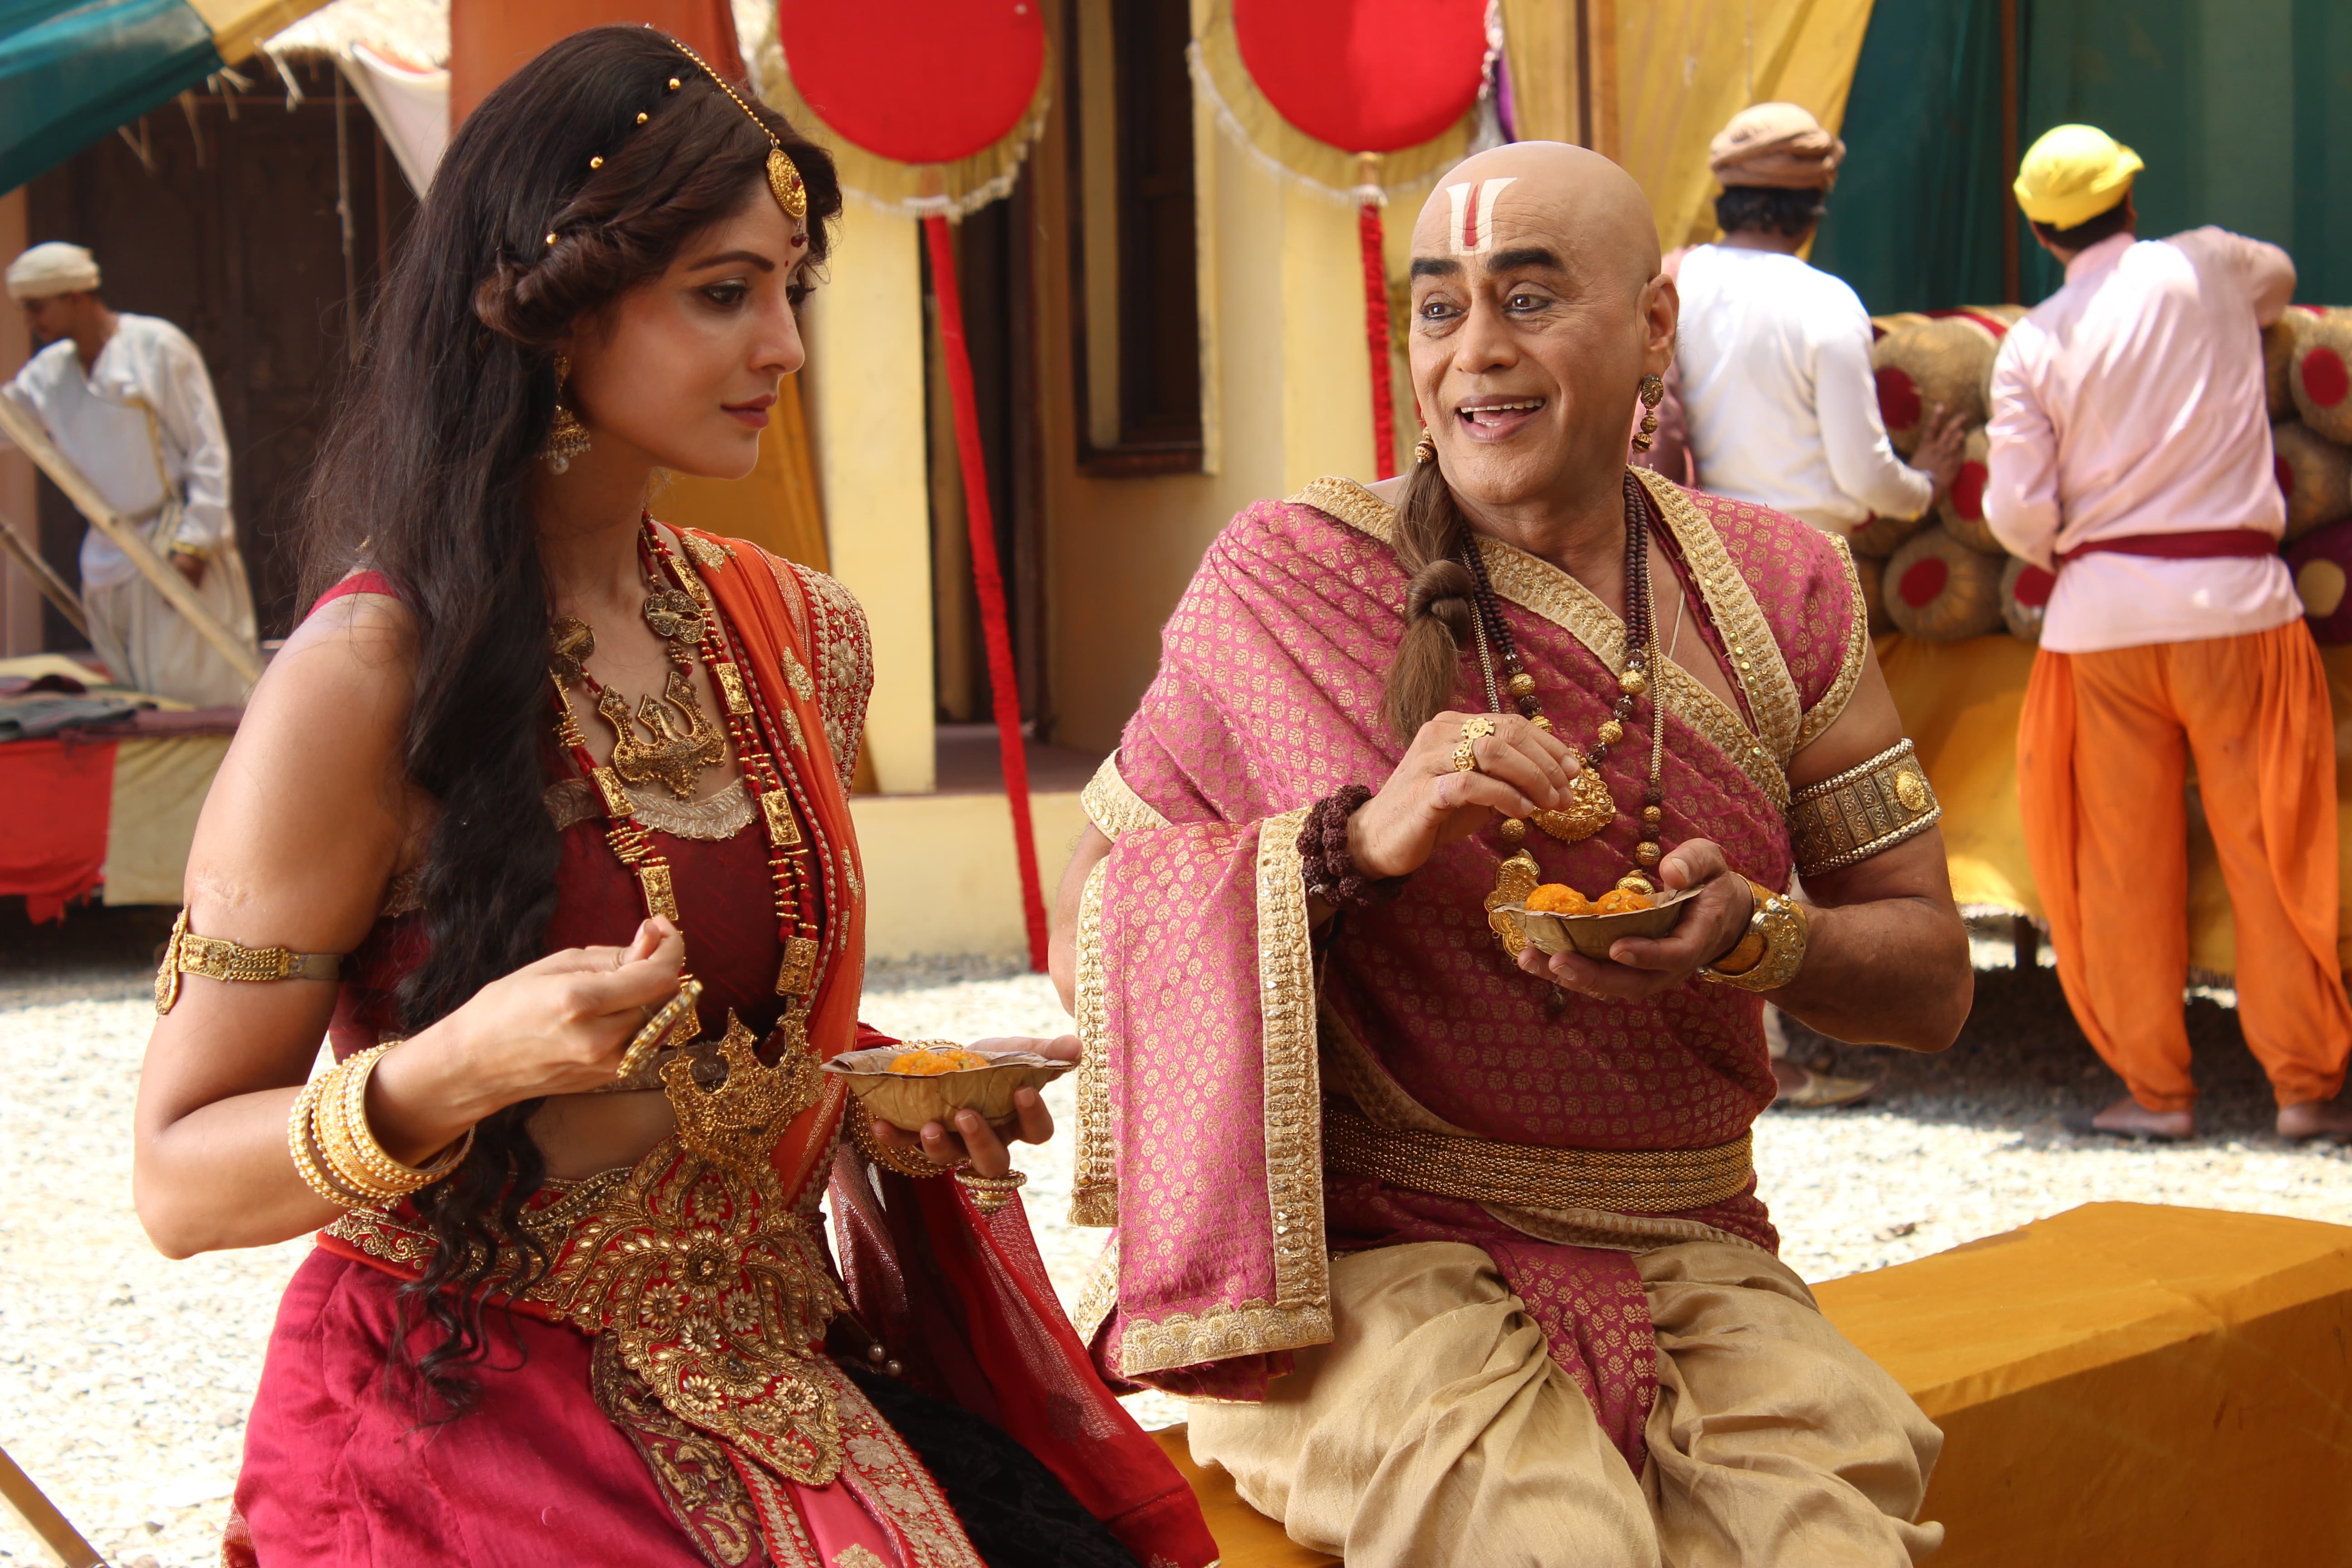 Tenali Rama Is At A New Turning Point, Says Actor Manav Gohil On Completion Of 500 Episodes